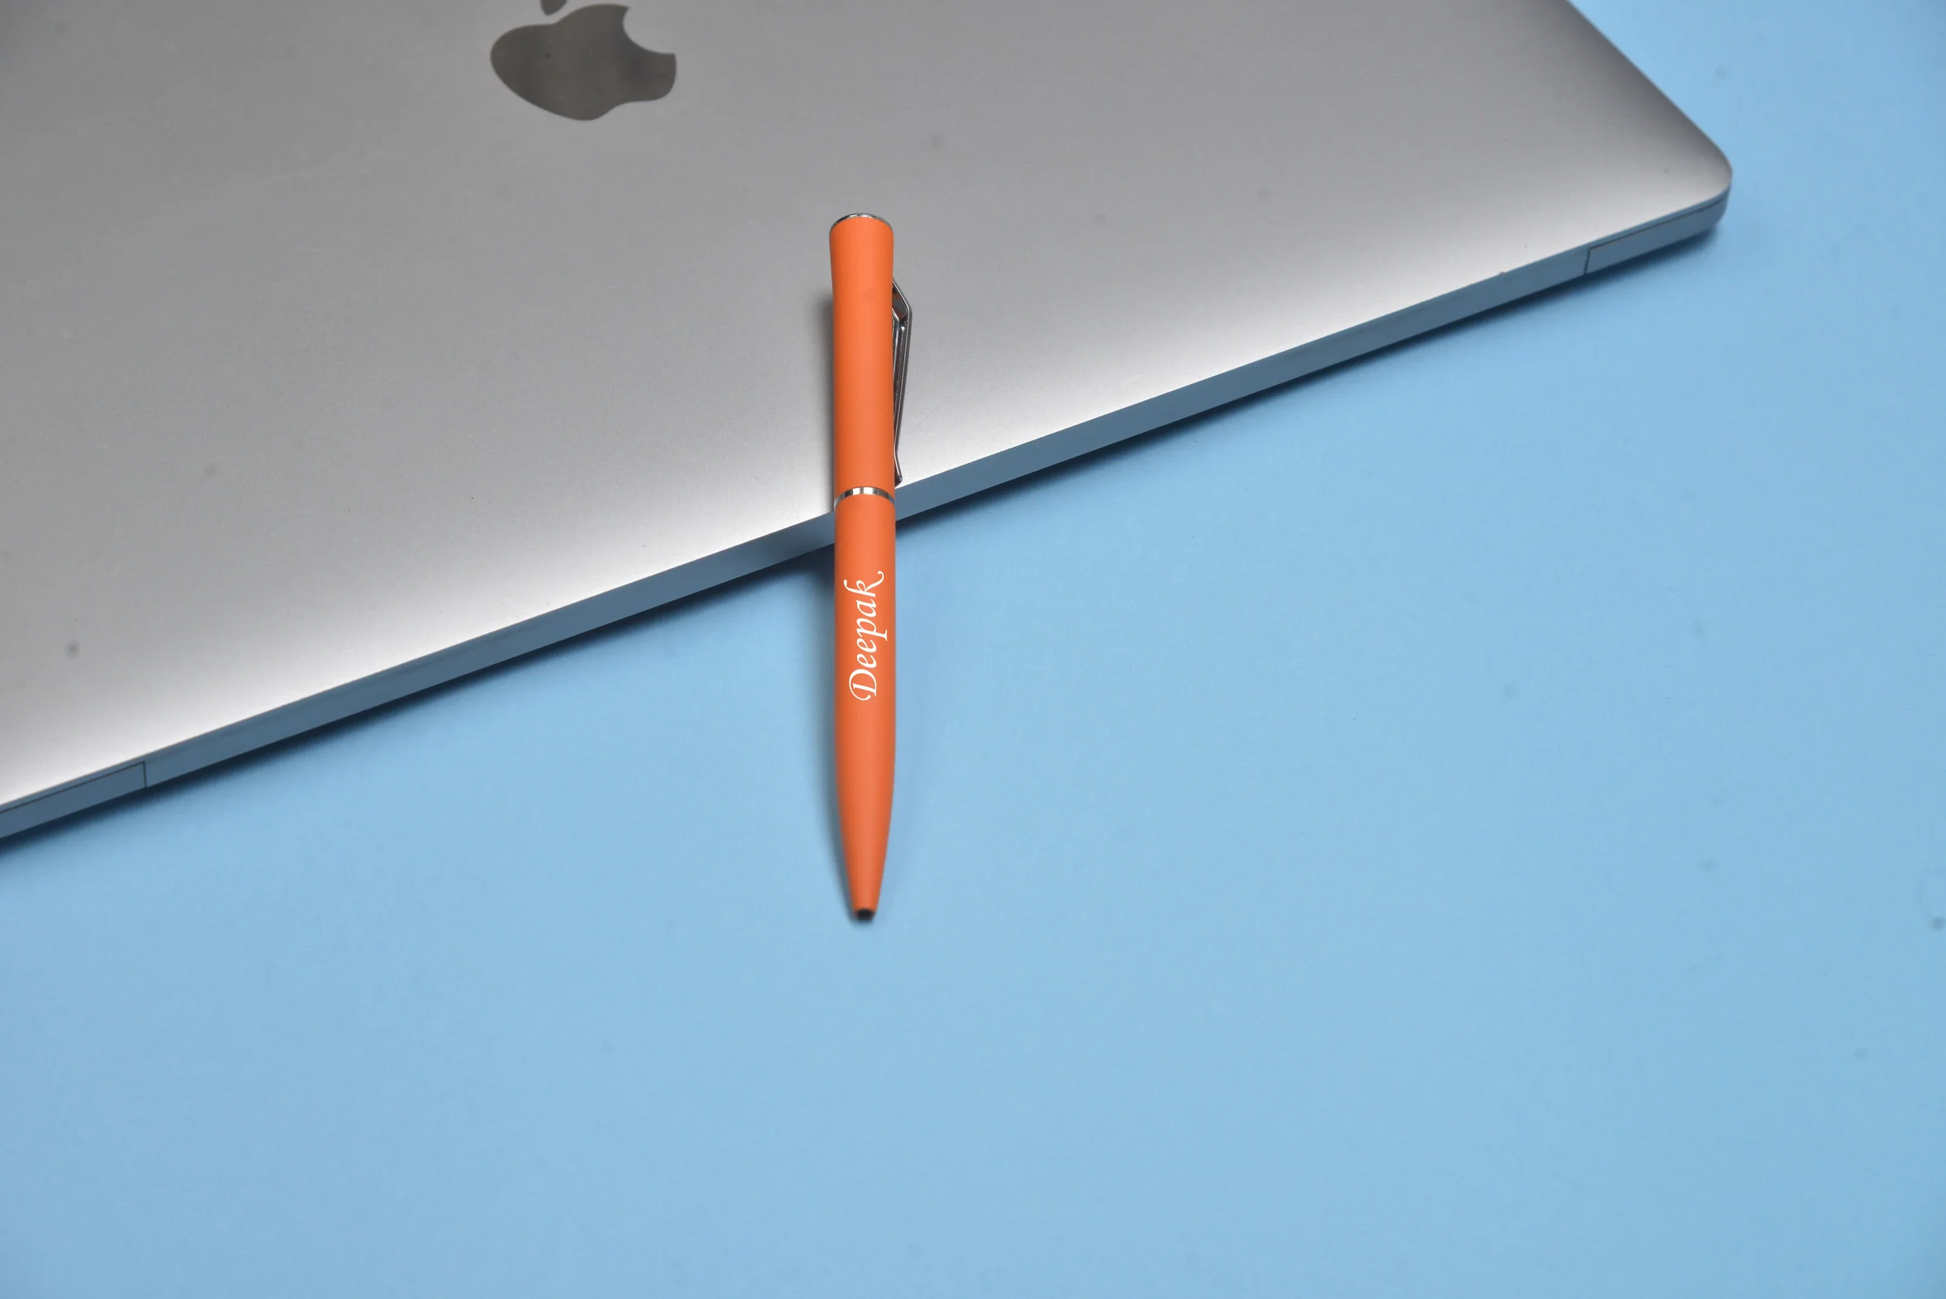 This durable and long-lasting metal pen is the perfect addition to any workspace.